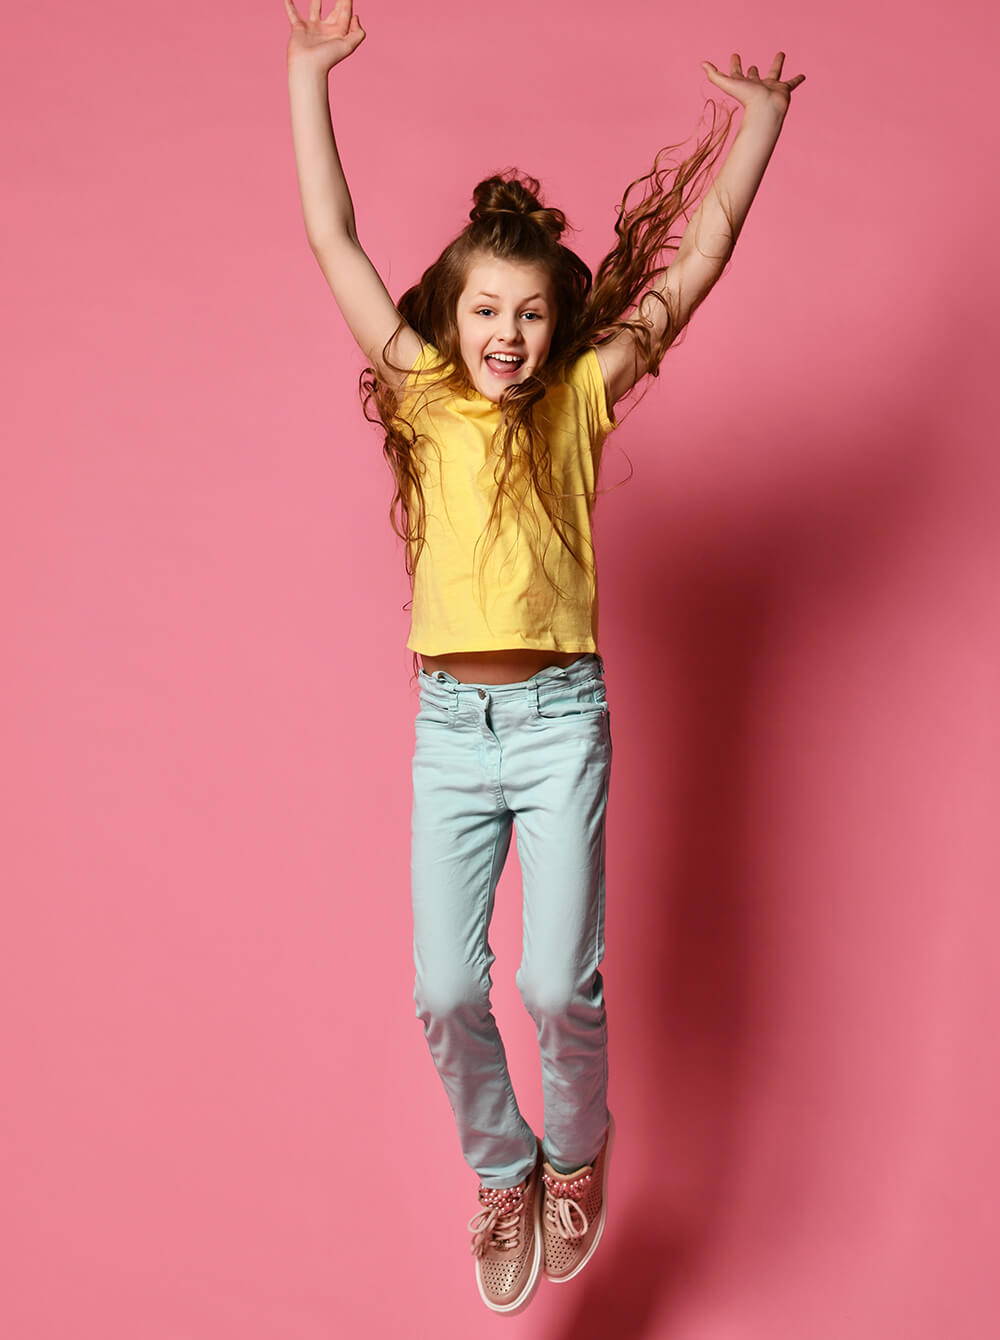 Young Girl Jumping In The Air